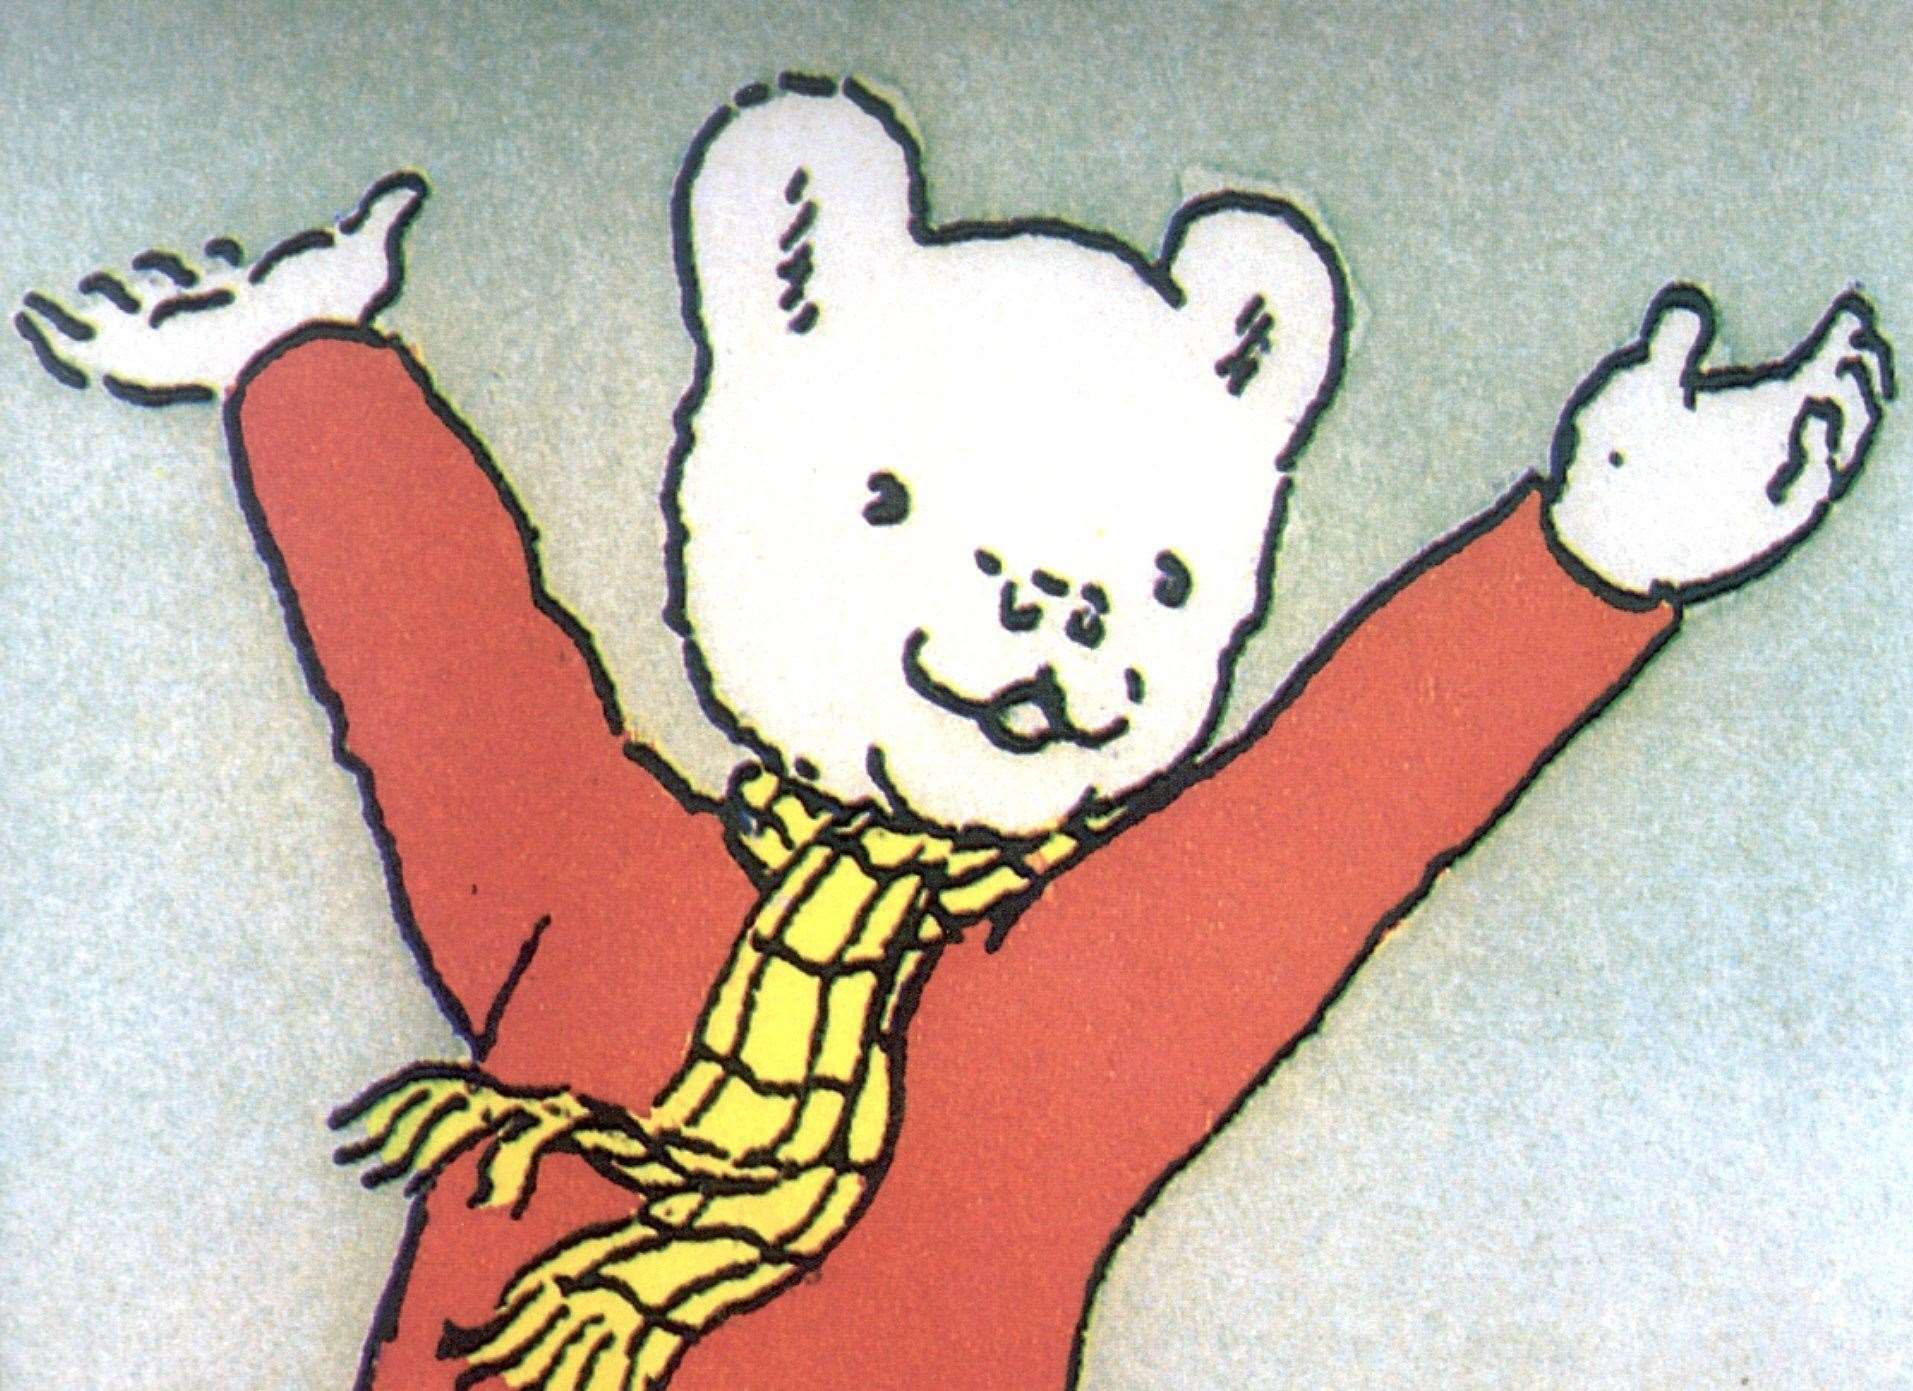 A garden somewhere in the city could be named in memory of the creator of Rupert Bear, Mary Tourtel